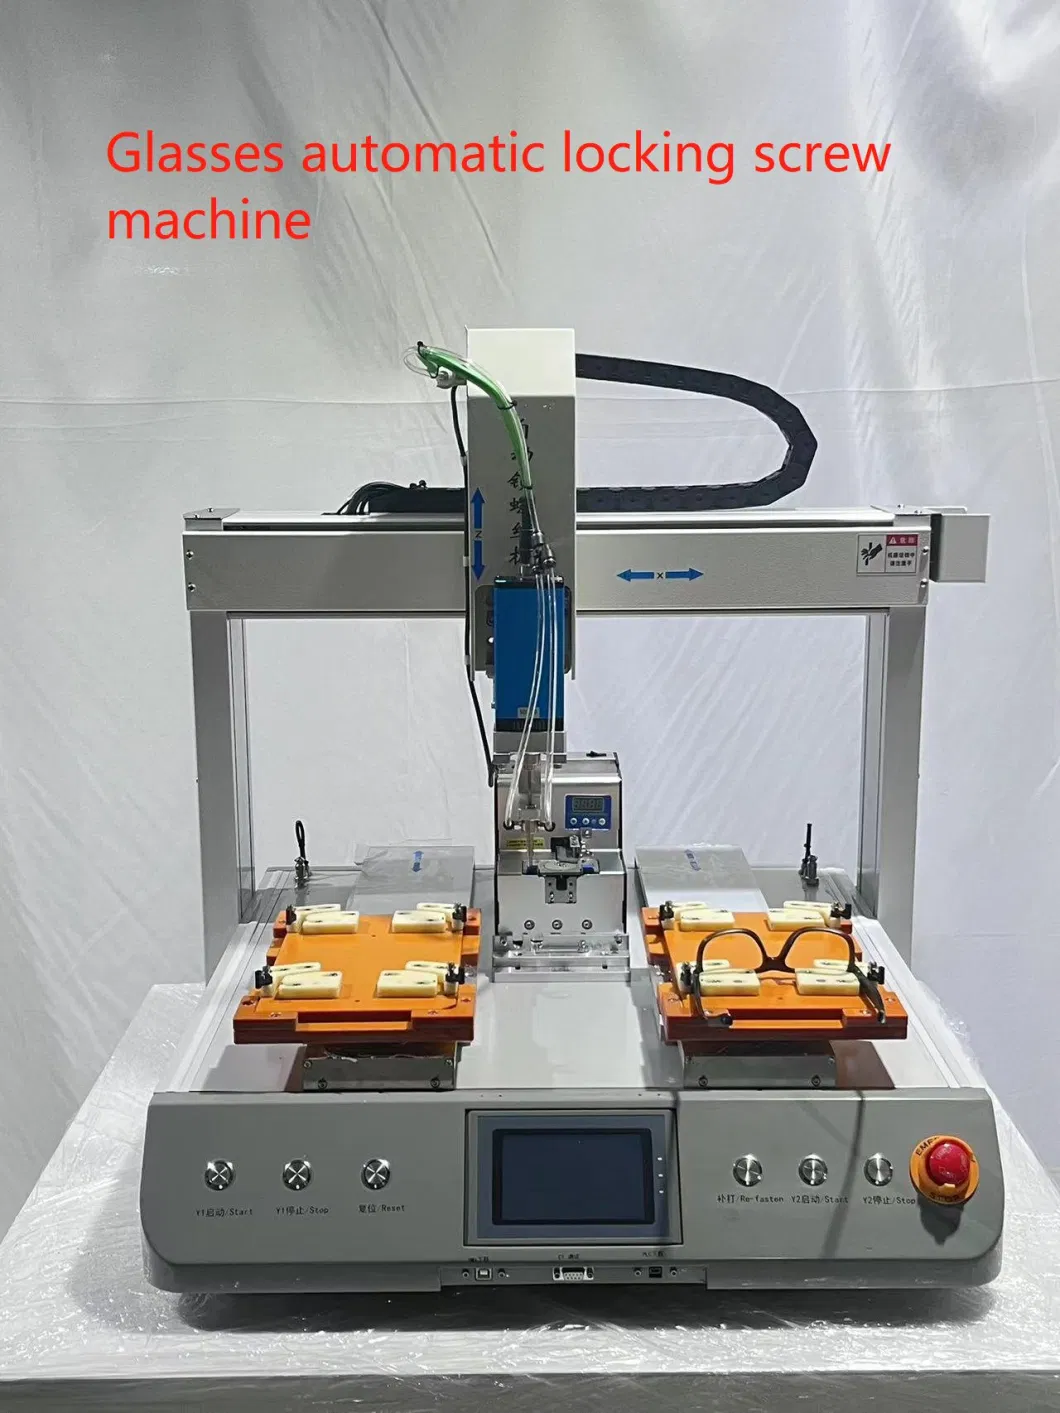 Ra Three-Dimensional Small Laser Marking Machine Is Used for Engraving Non-Metal/Metal/Plastic/Steel/Tools/Apparatus/Iron